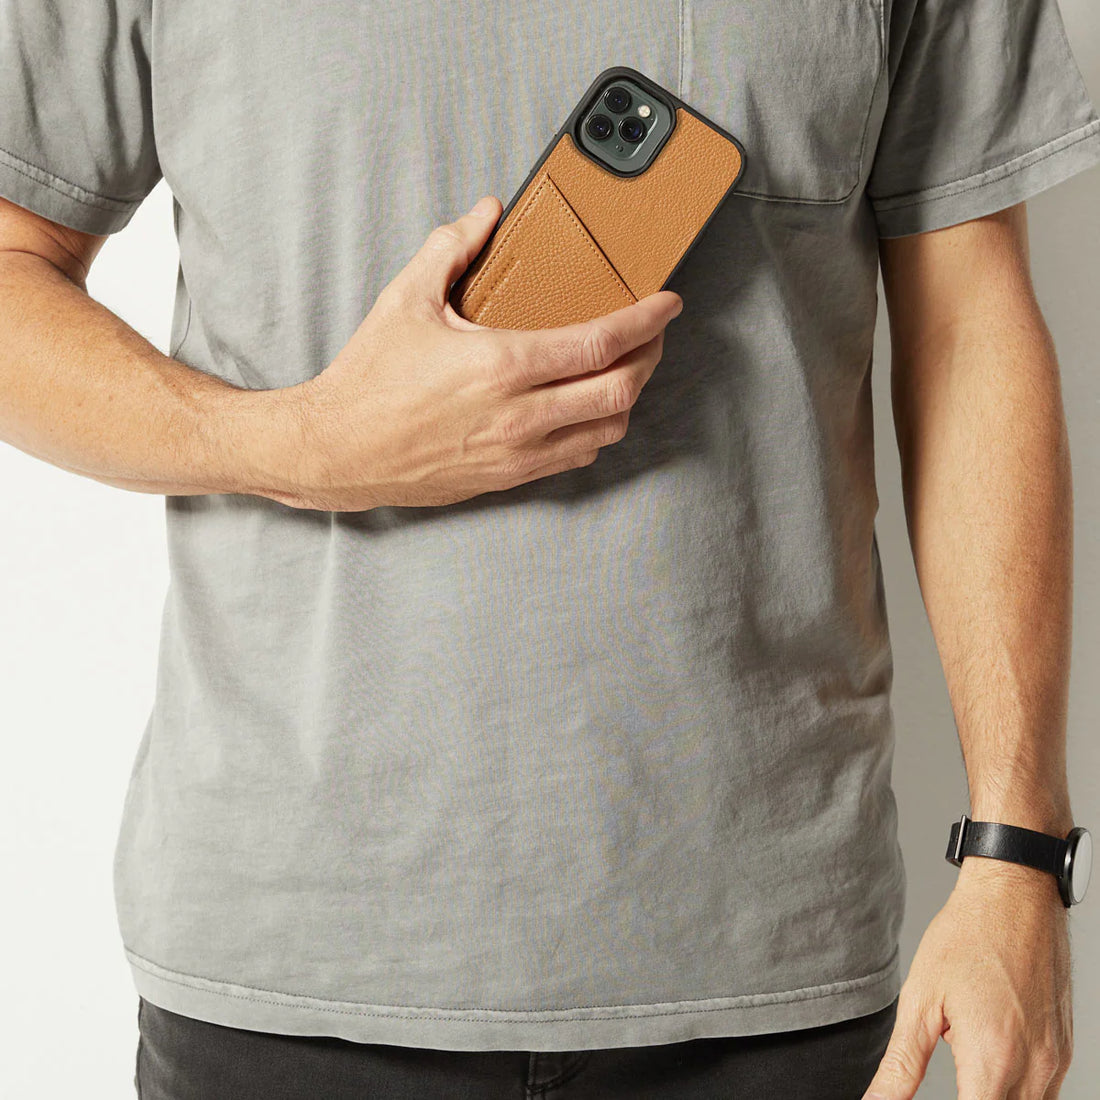 Status Anxiety Who's Who Leather Phone Case (iPhone) - Tan